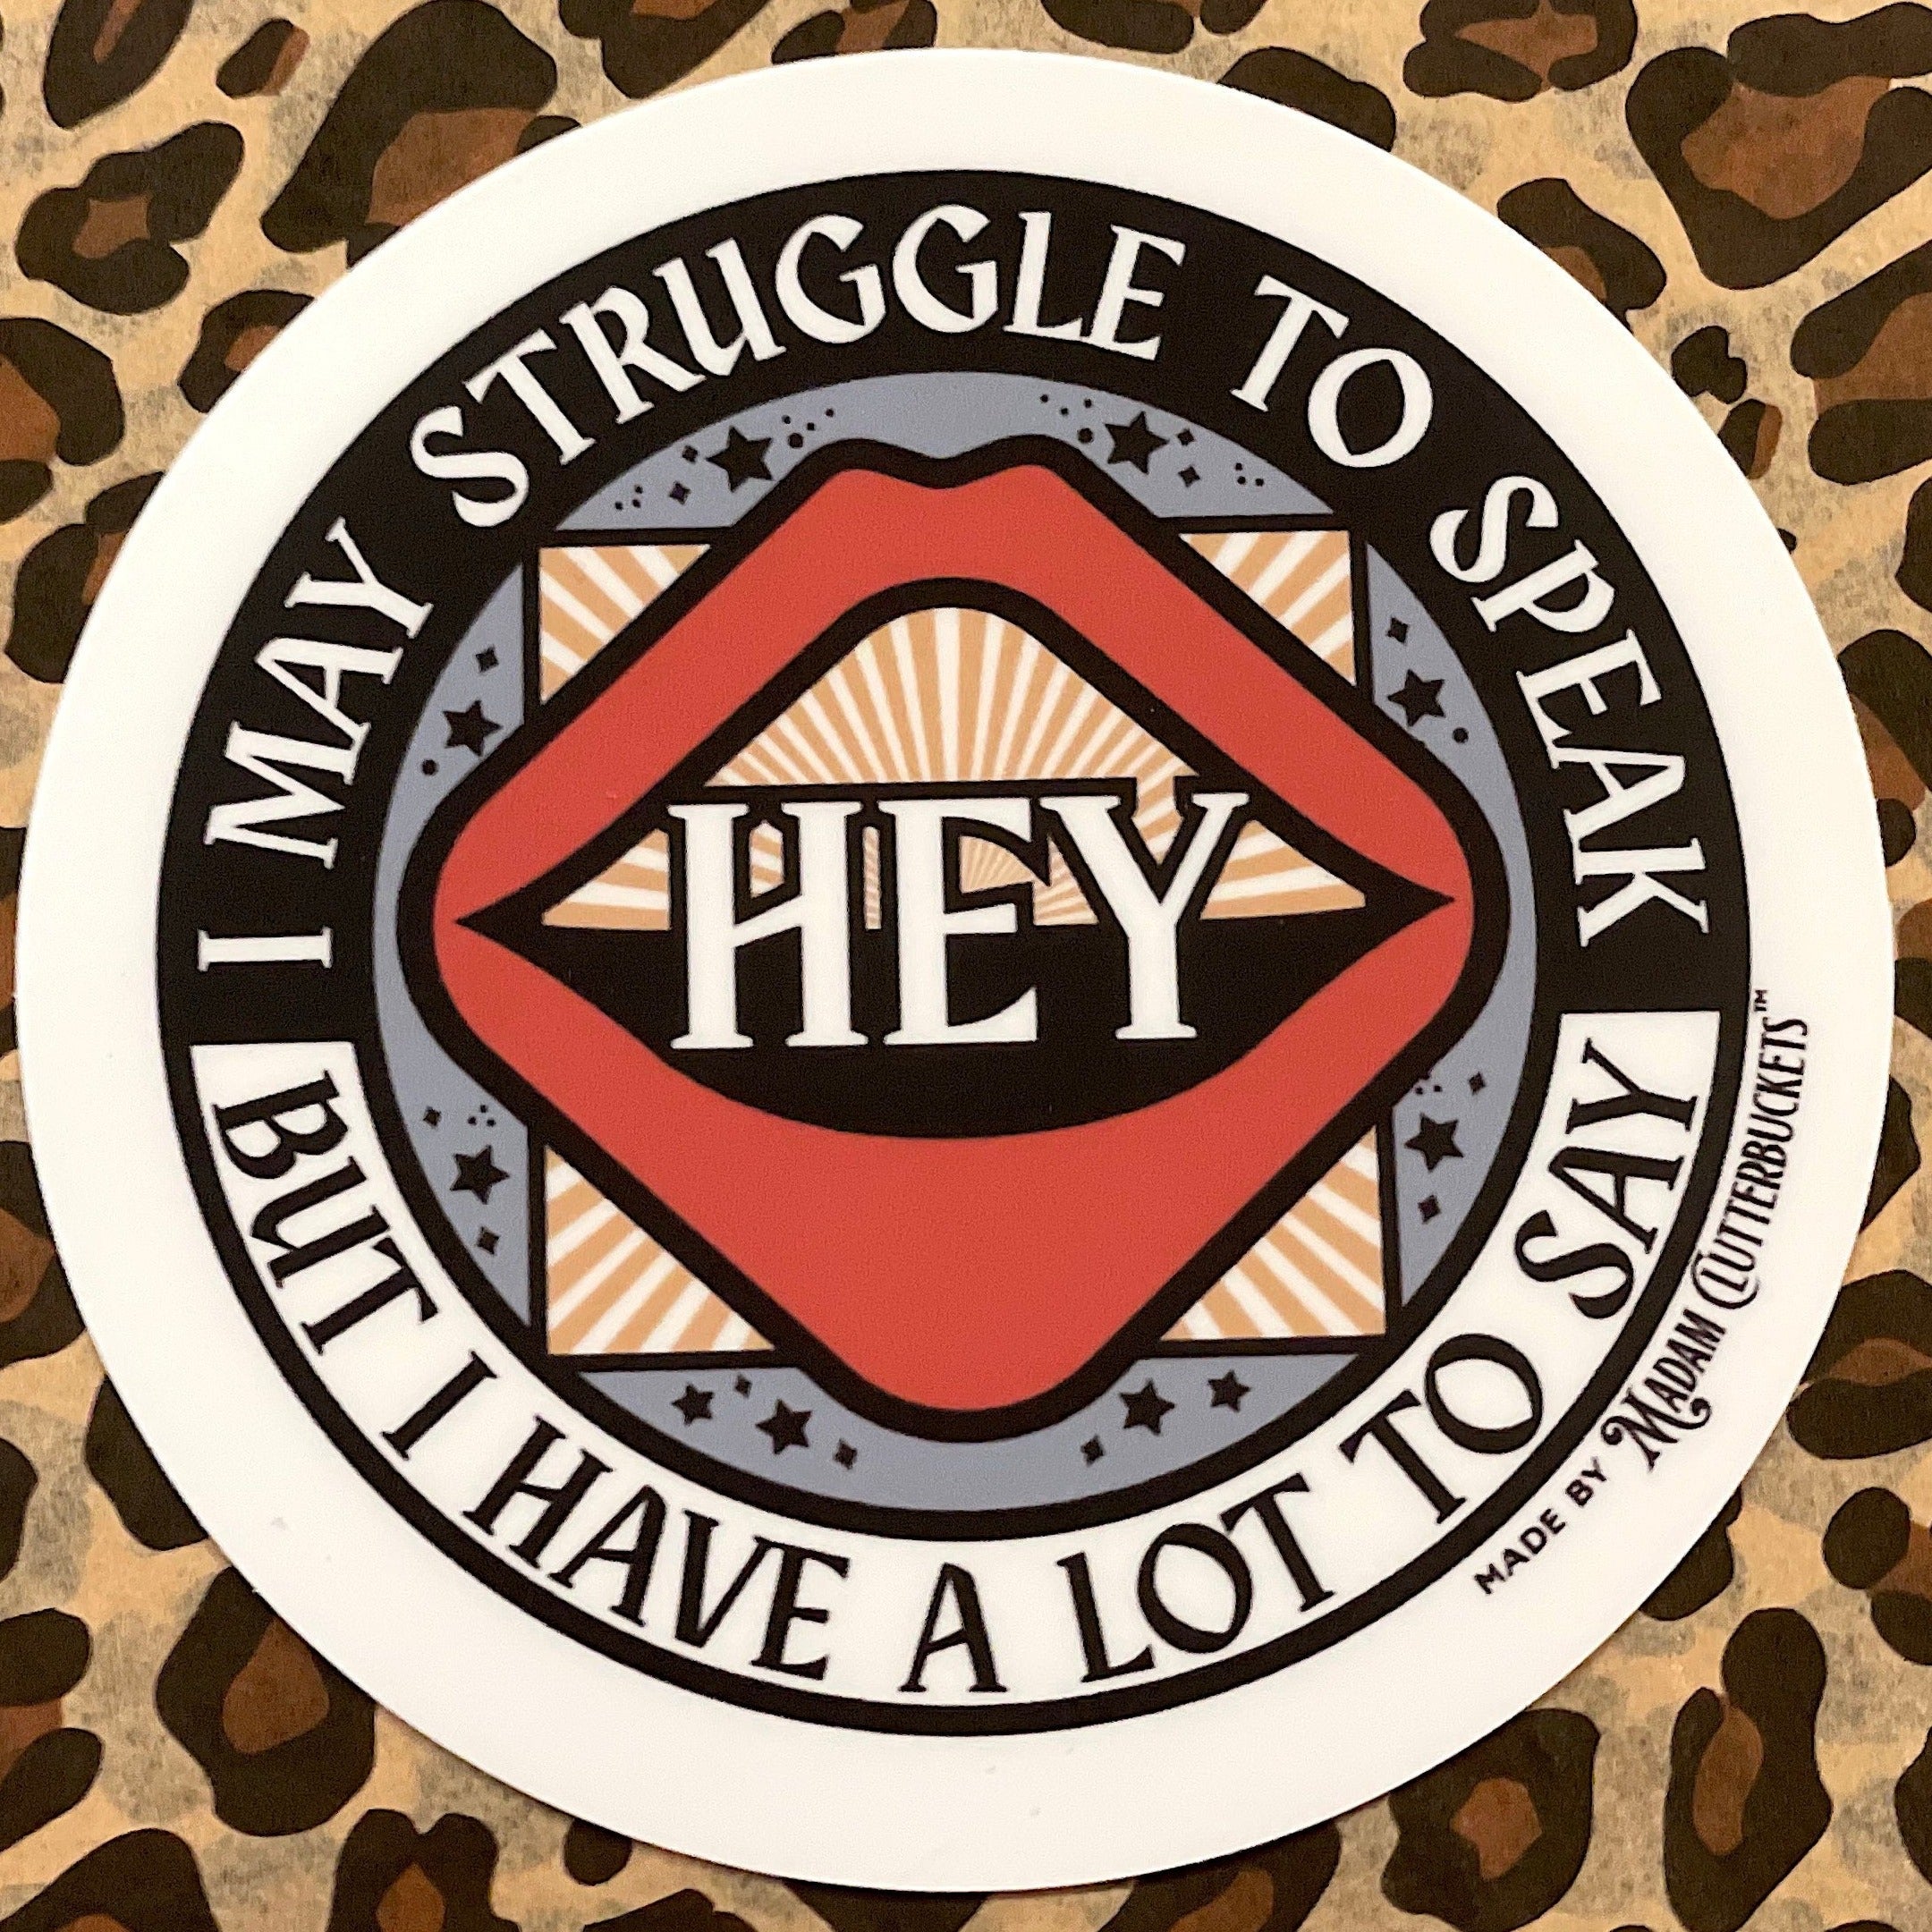 I May Struggle To Speak But I Have a Lot to Say- Small Sticker